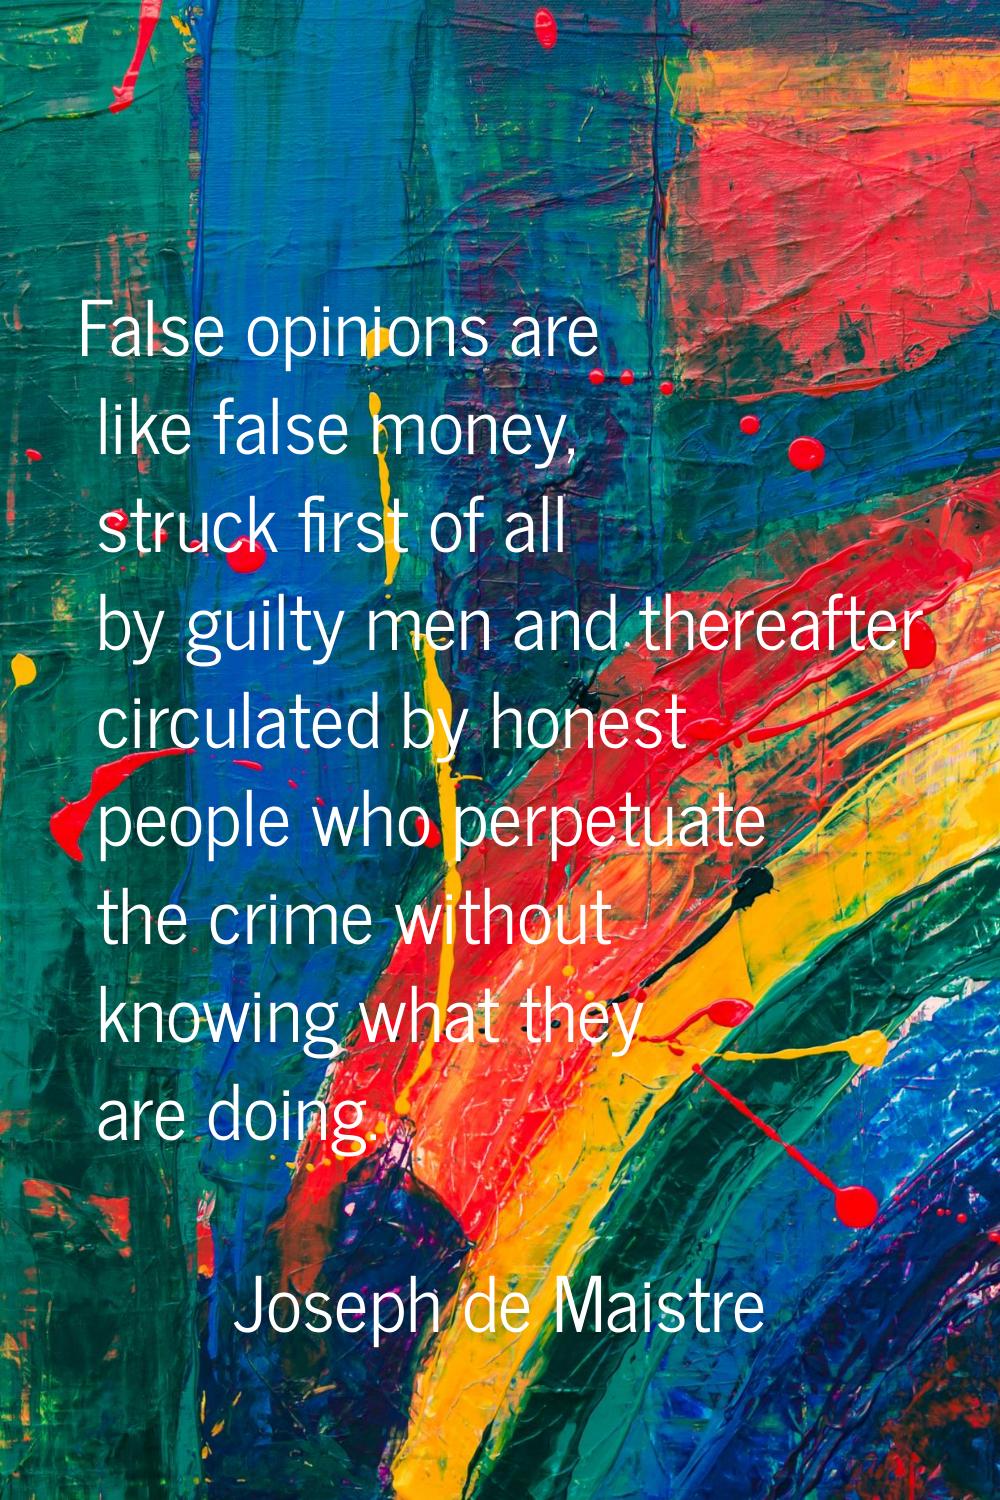 False opinions are like false money, struck first of all by guilty men and thereafter circulated by